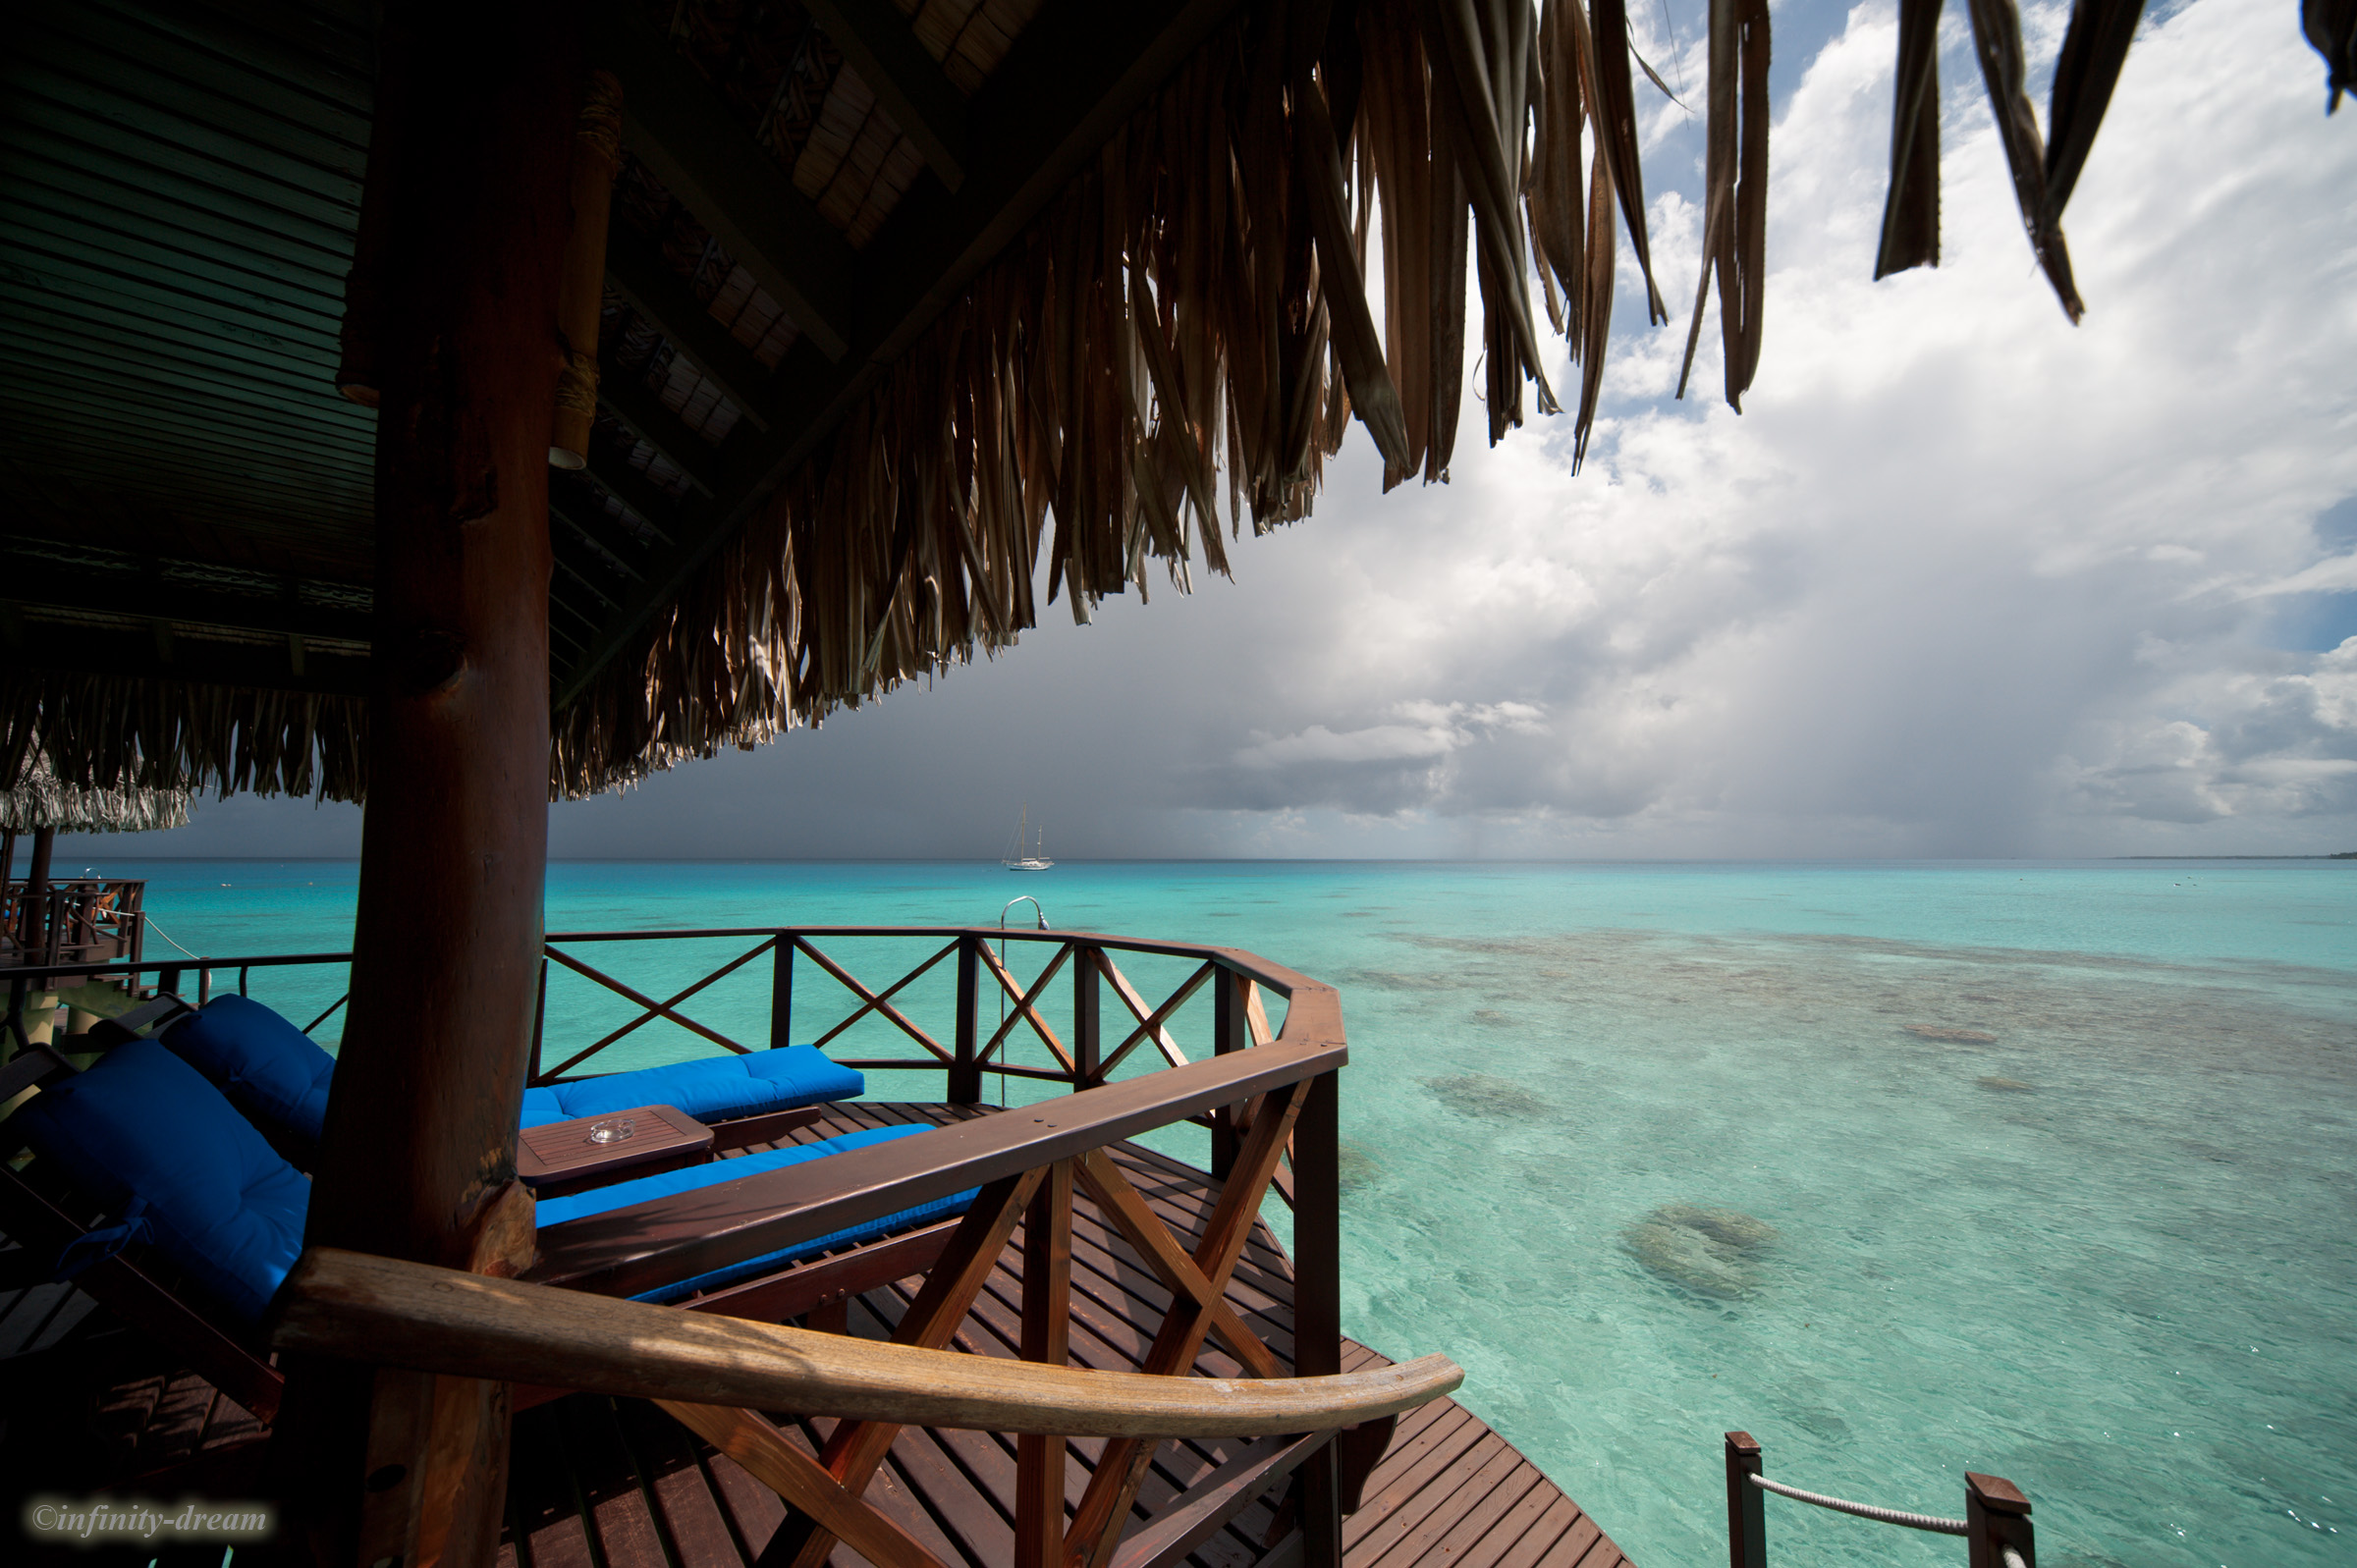 from the deck of an overwater bungalow